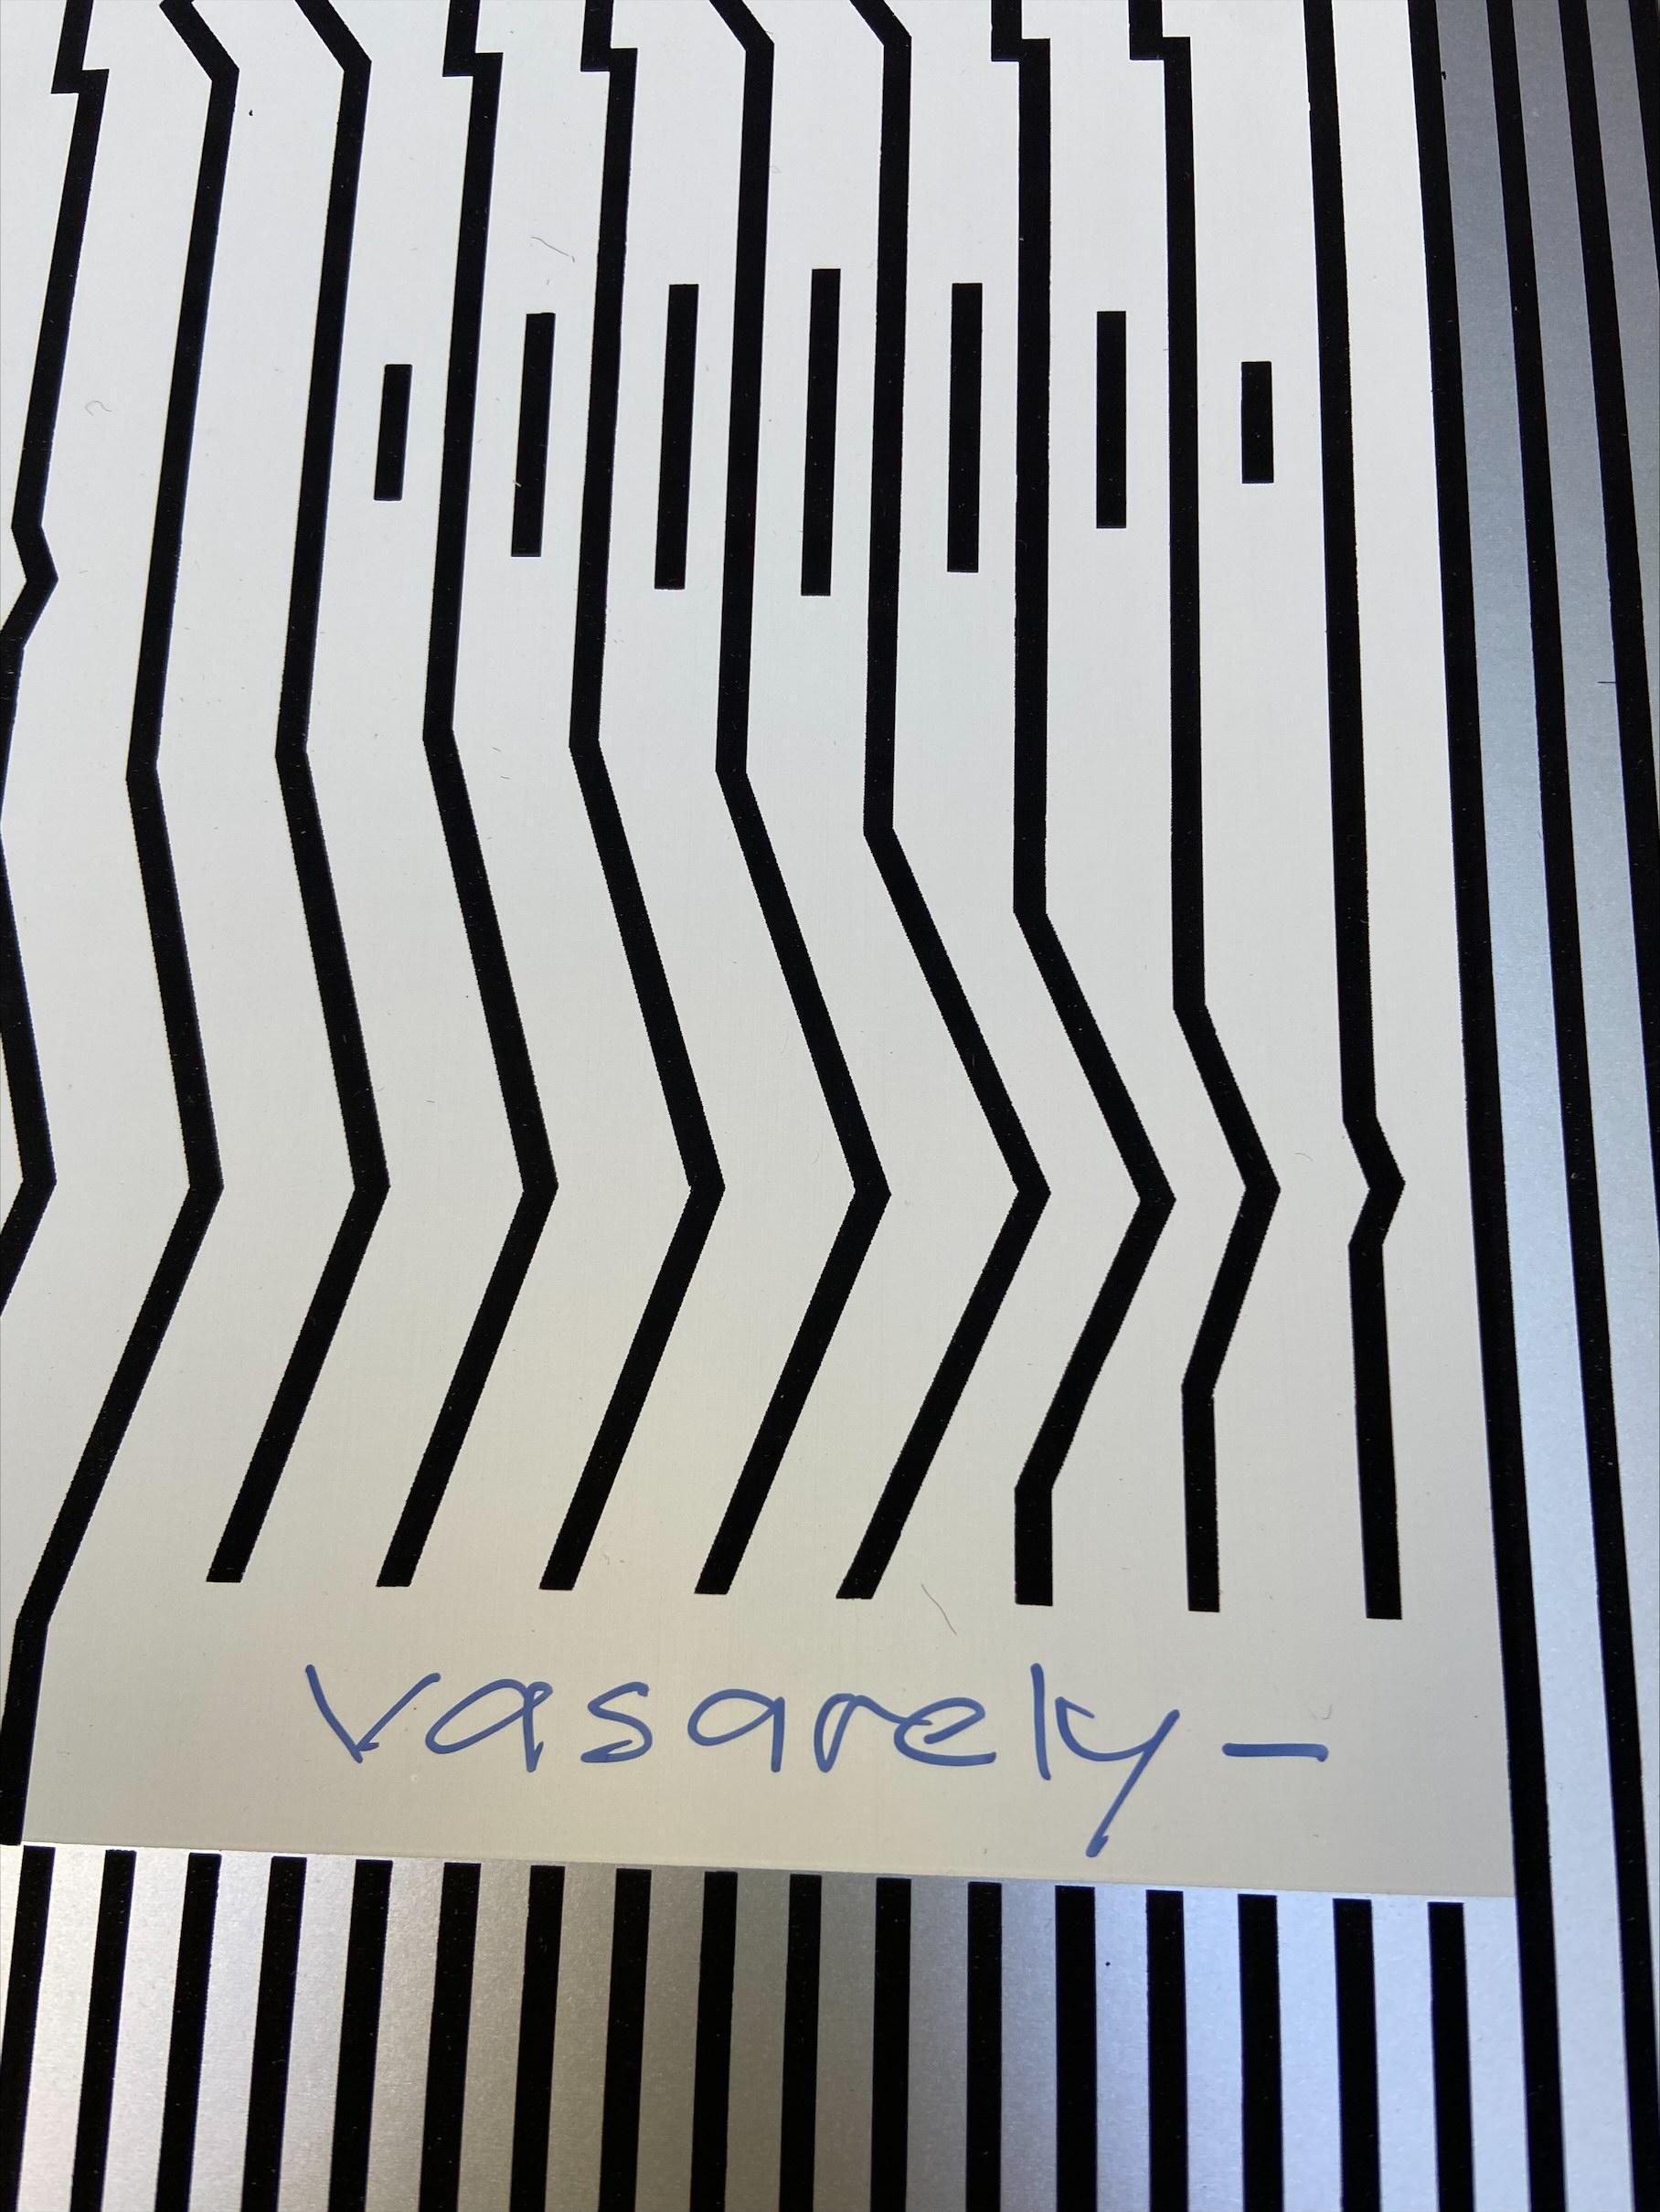 Victor VASARELY (1908-1997) - Zither
Serigraphy on cardboard with silver background in relief 
signed lower right 
Height: 60 cm - Width: 40 cm
1973
900€